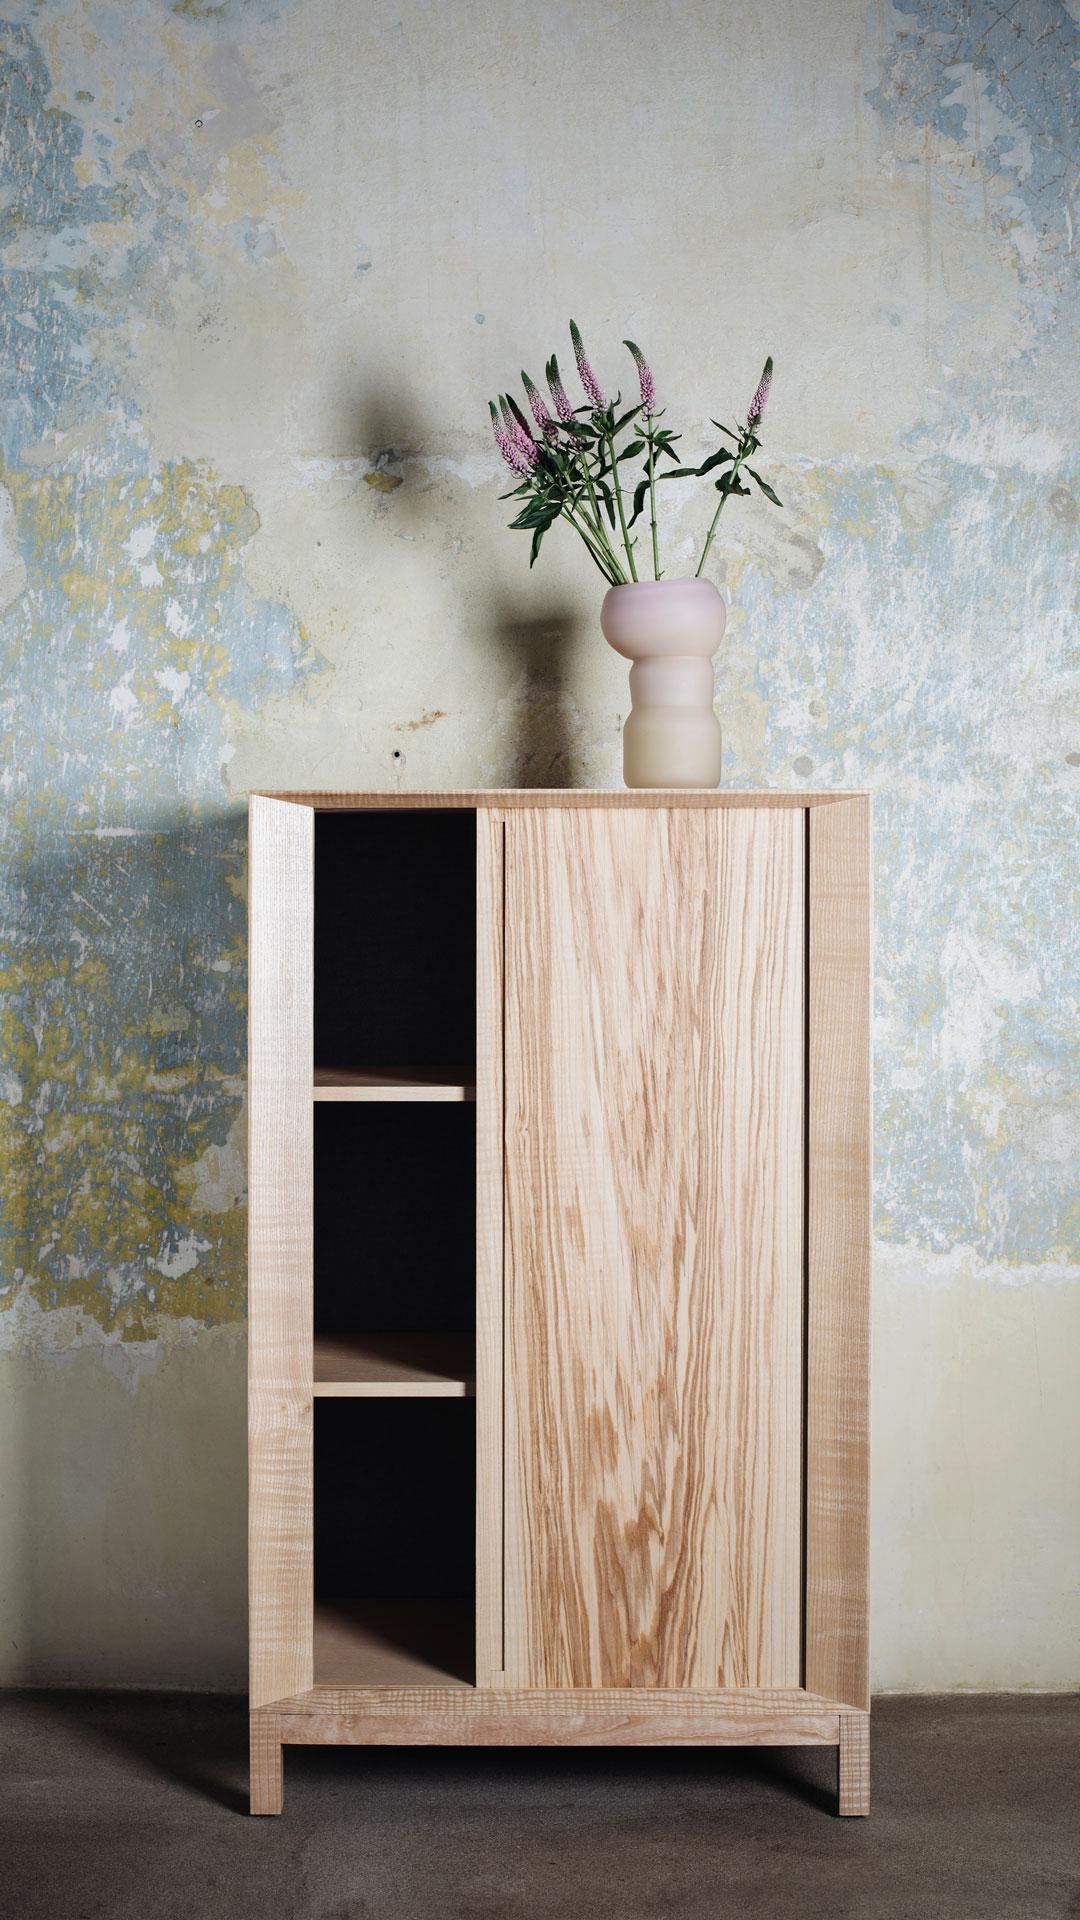 Collection ROLLETA designed by Herrmann & Coufal and manufactured by local Czech design studio FUTURO presents the variety of ash tree drawings, craftsmanship and a specific opening system.
It was first presented at the Designblok Prague 2020 show